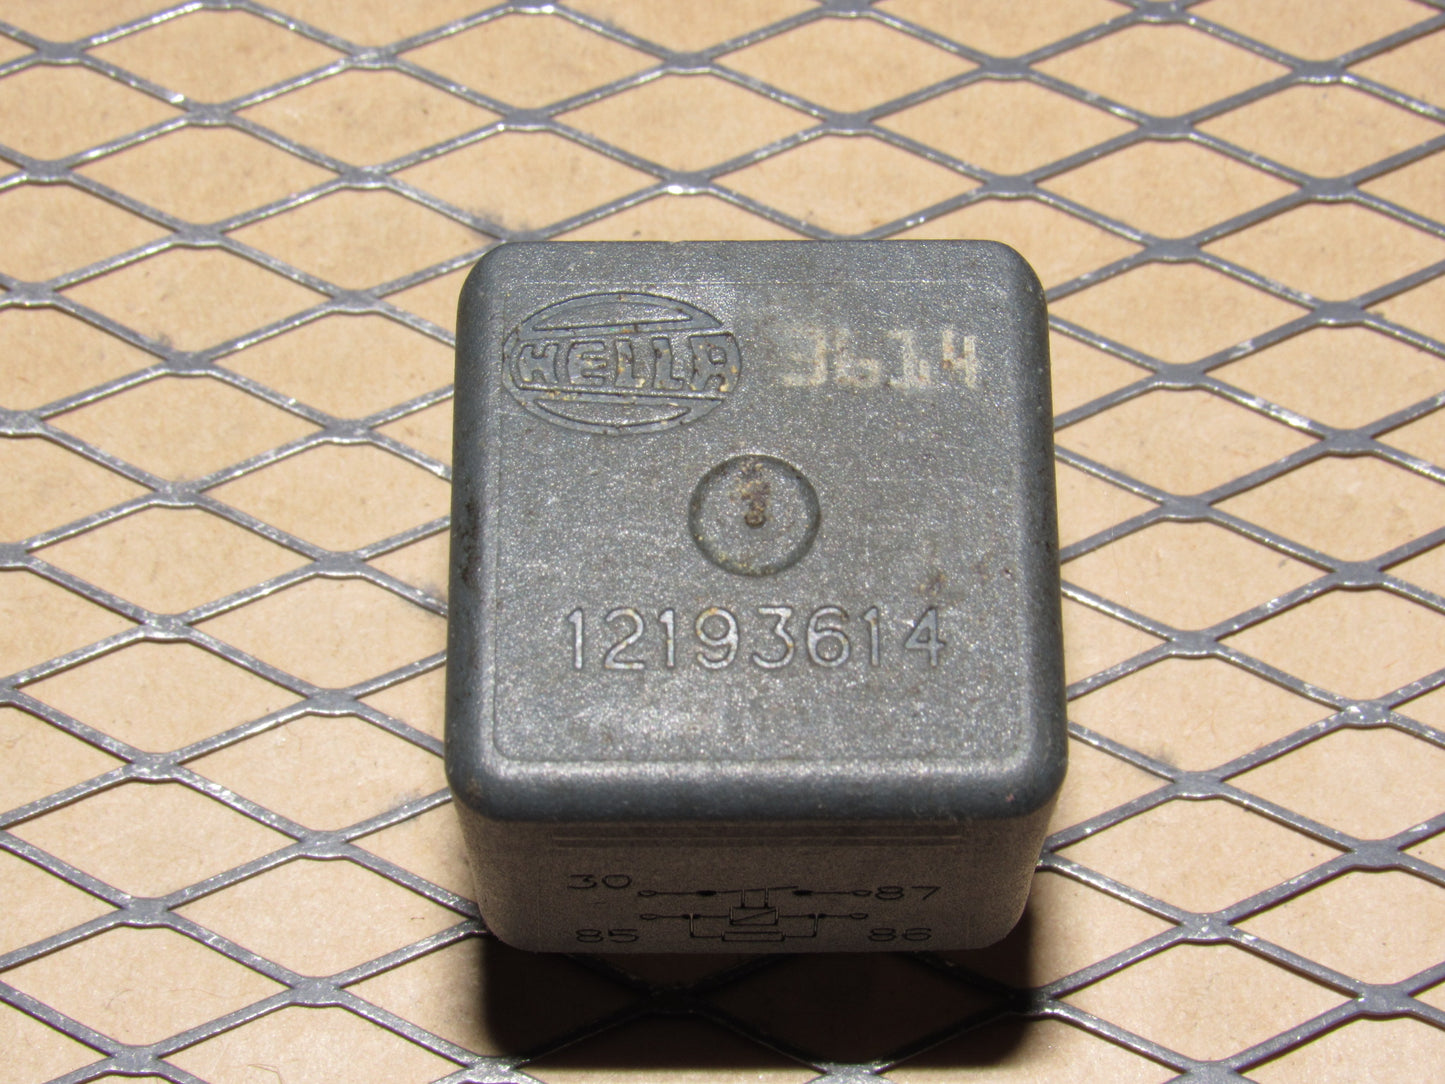 GM Relay 3614 / 12193614